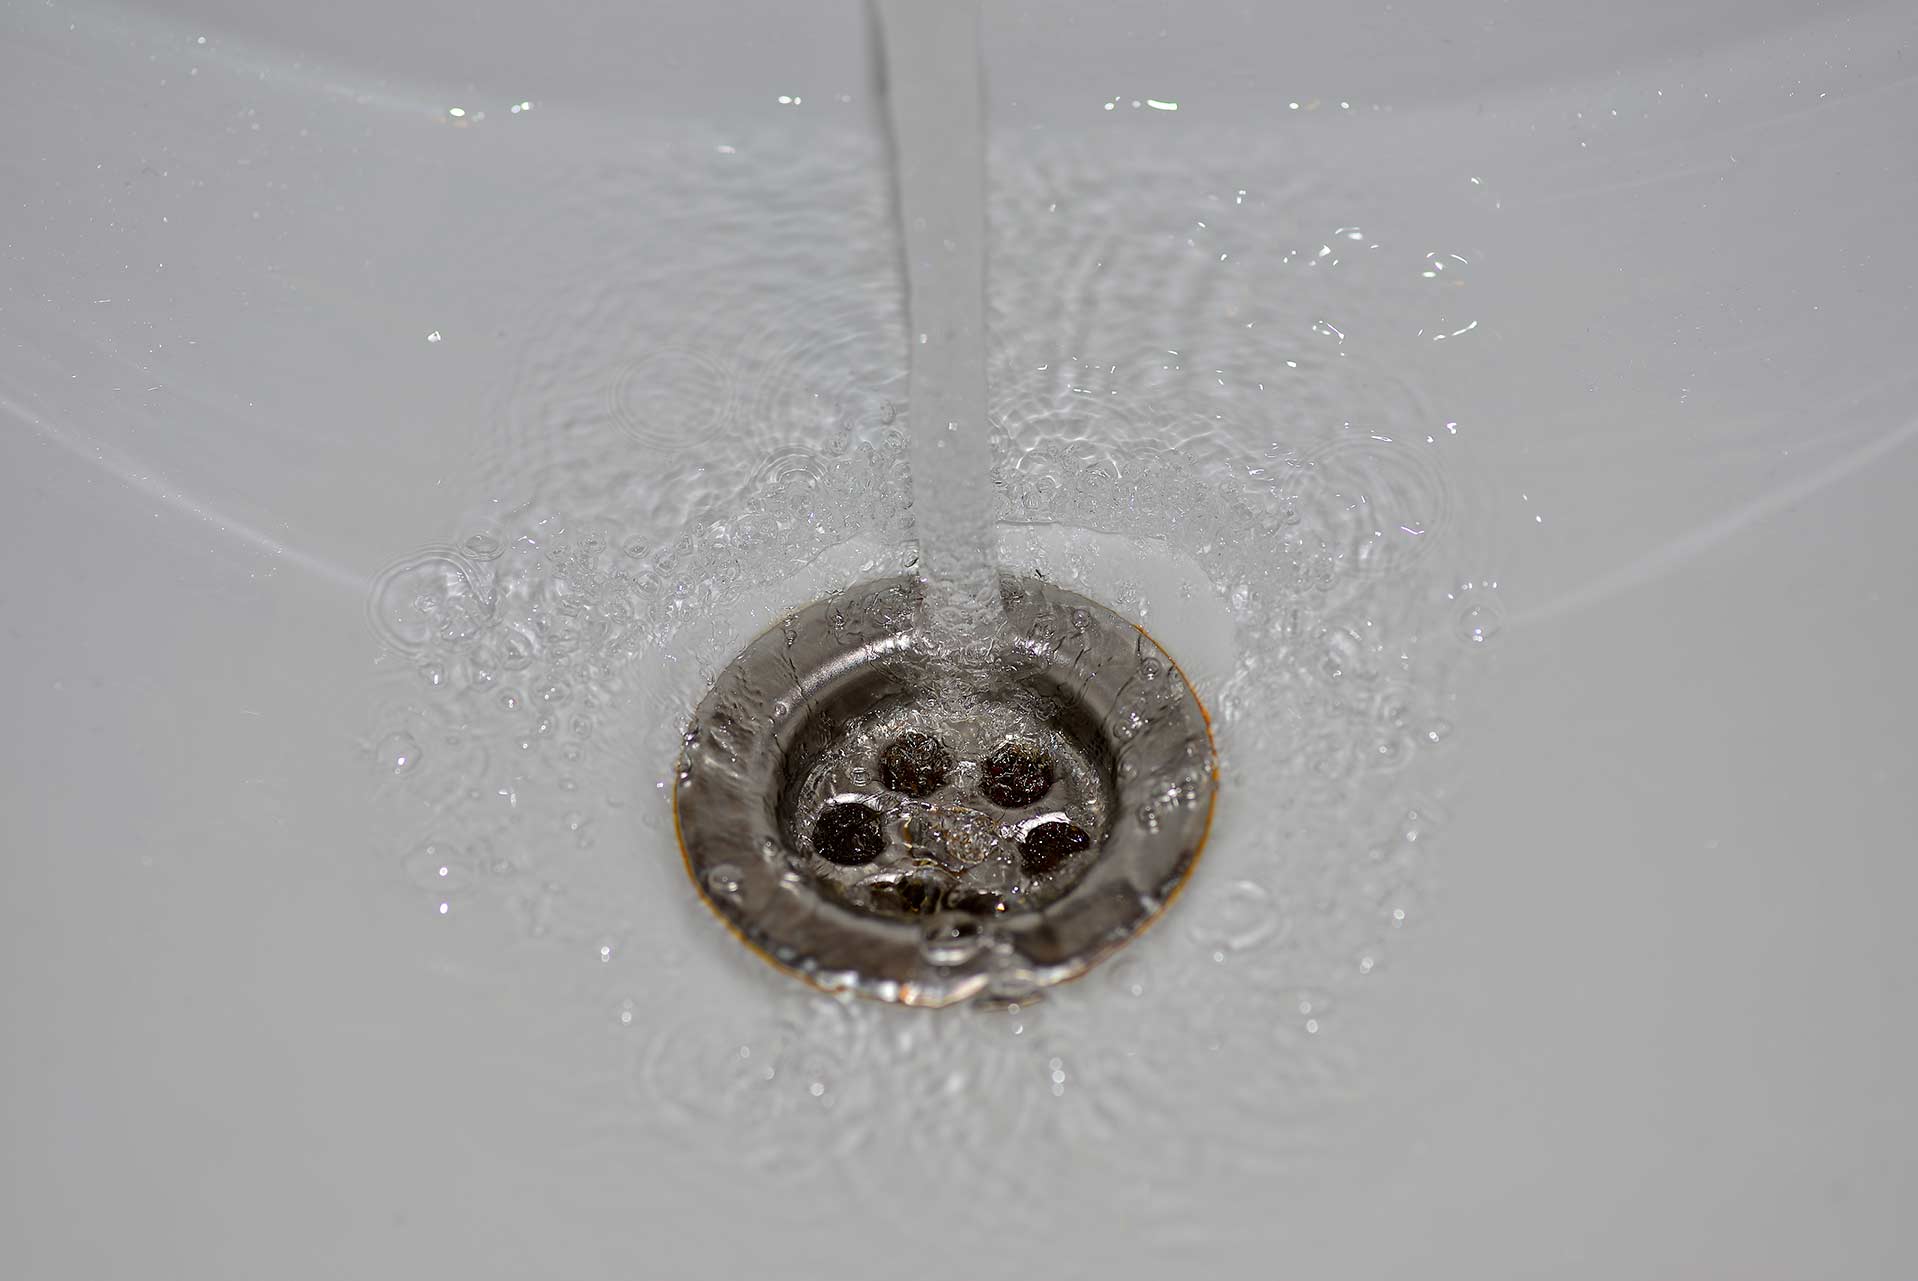 A2B Drains provides services to unblock blocked sinks and drains for properties in Ealing Brent.